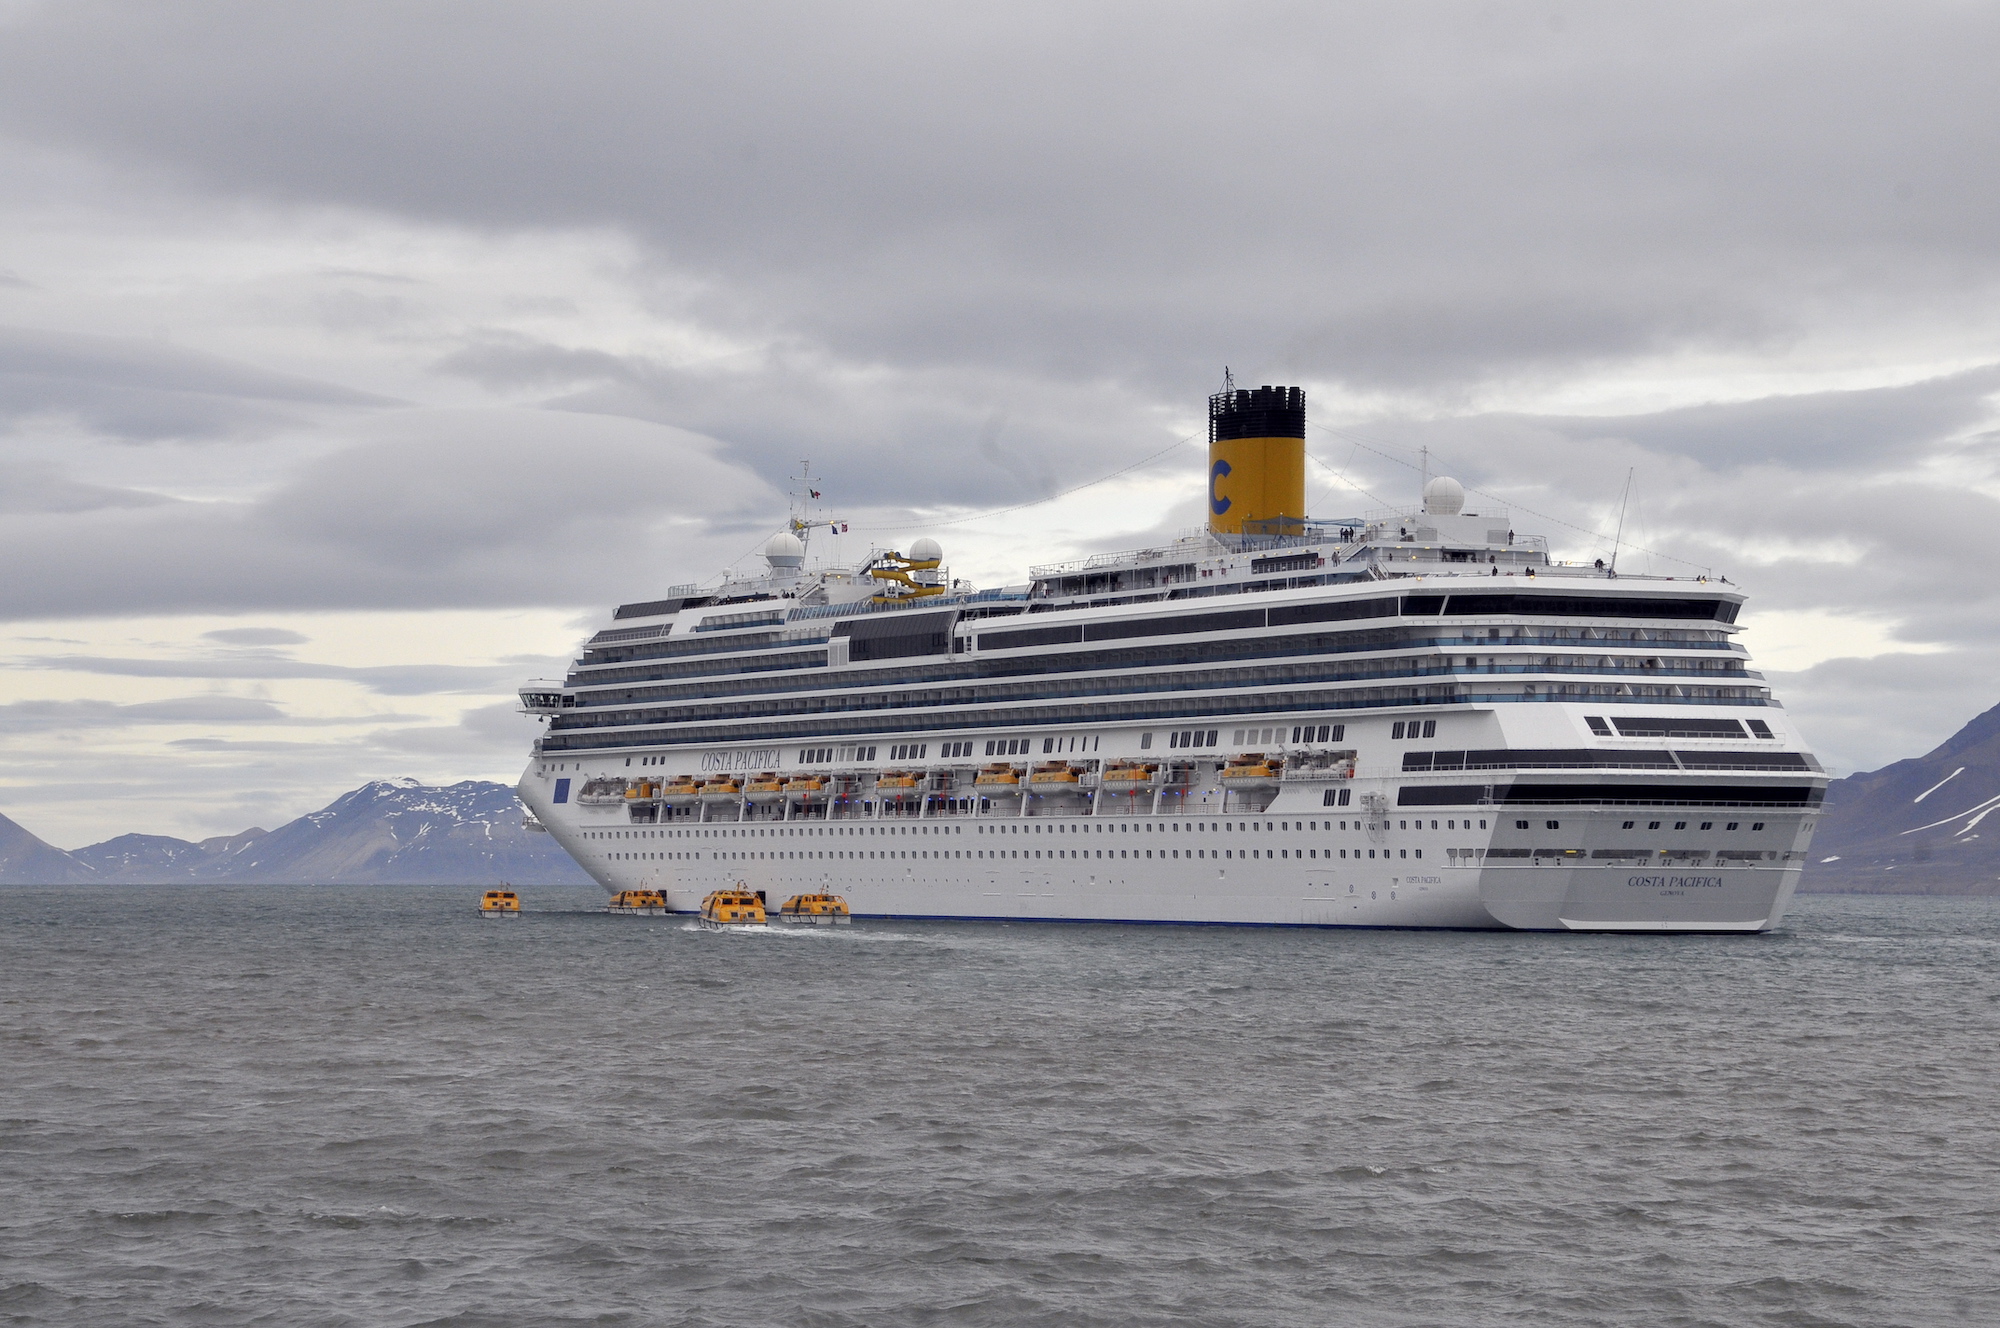 The Costa Pacifica cruise ship in Norway's North Atlantic